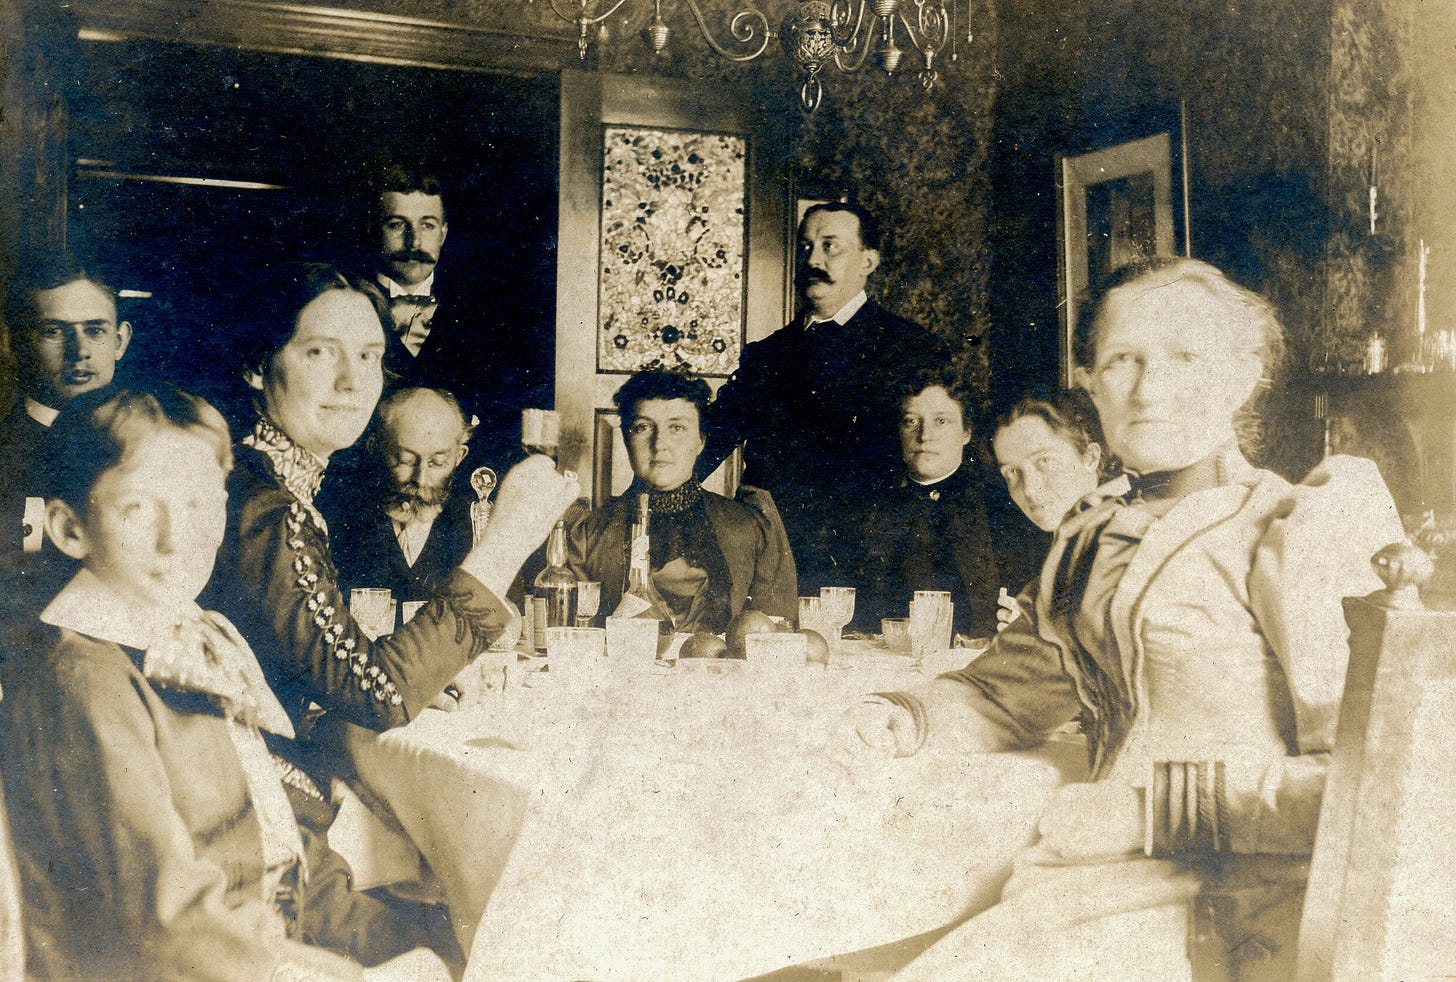 People gathered around a table with bottles of liquor